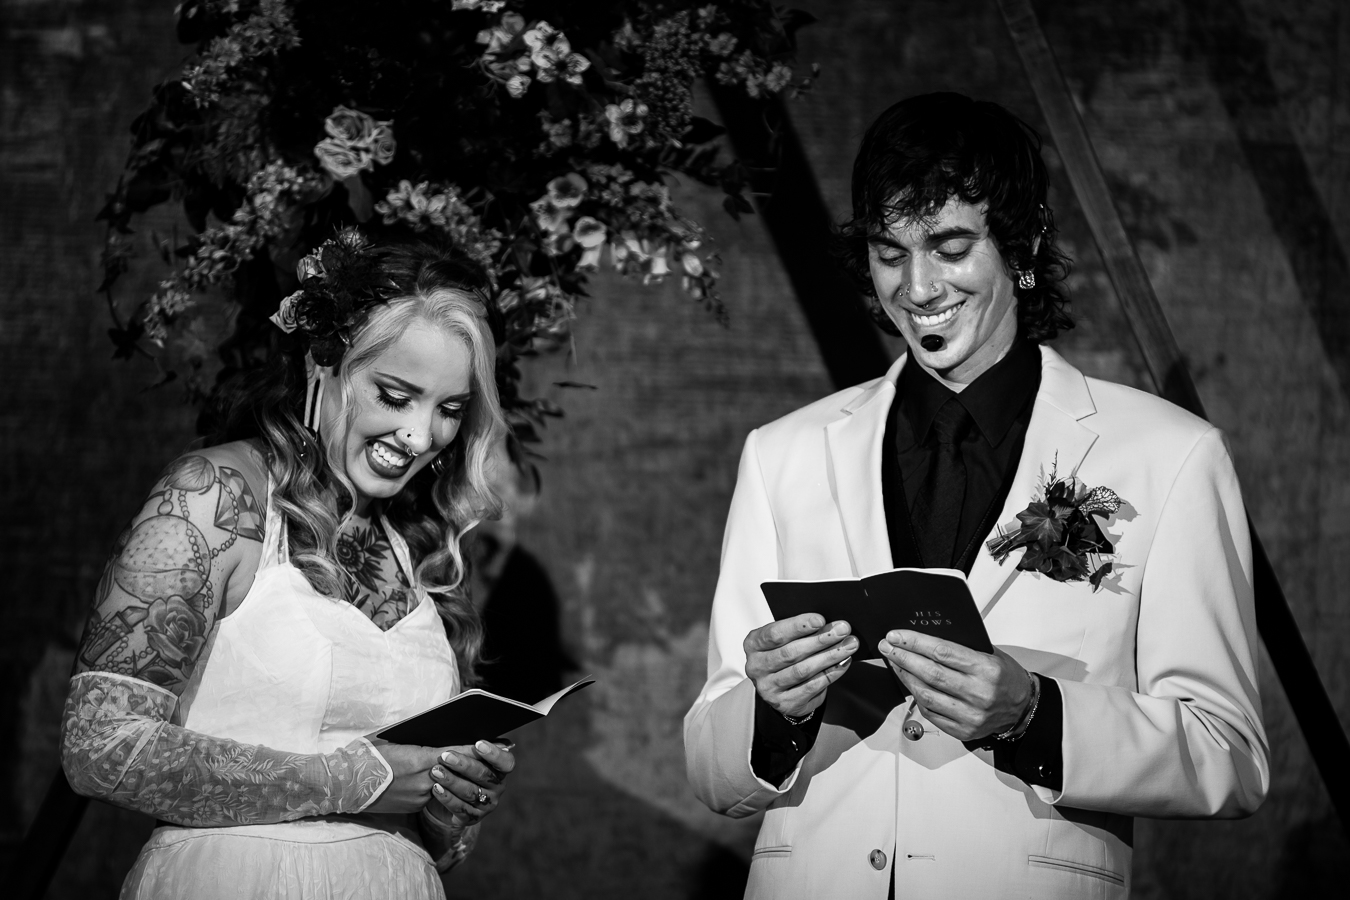 Cork Factory Hotel Wedding Photographer, lisa rhinehart, captures this authentic, candid black and white image of the couple laughing and smiling as they share their vows with each other during their wedding ceremony 